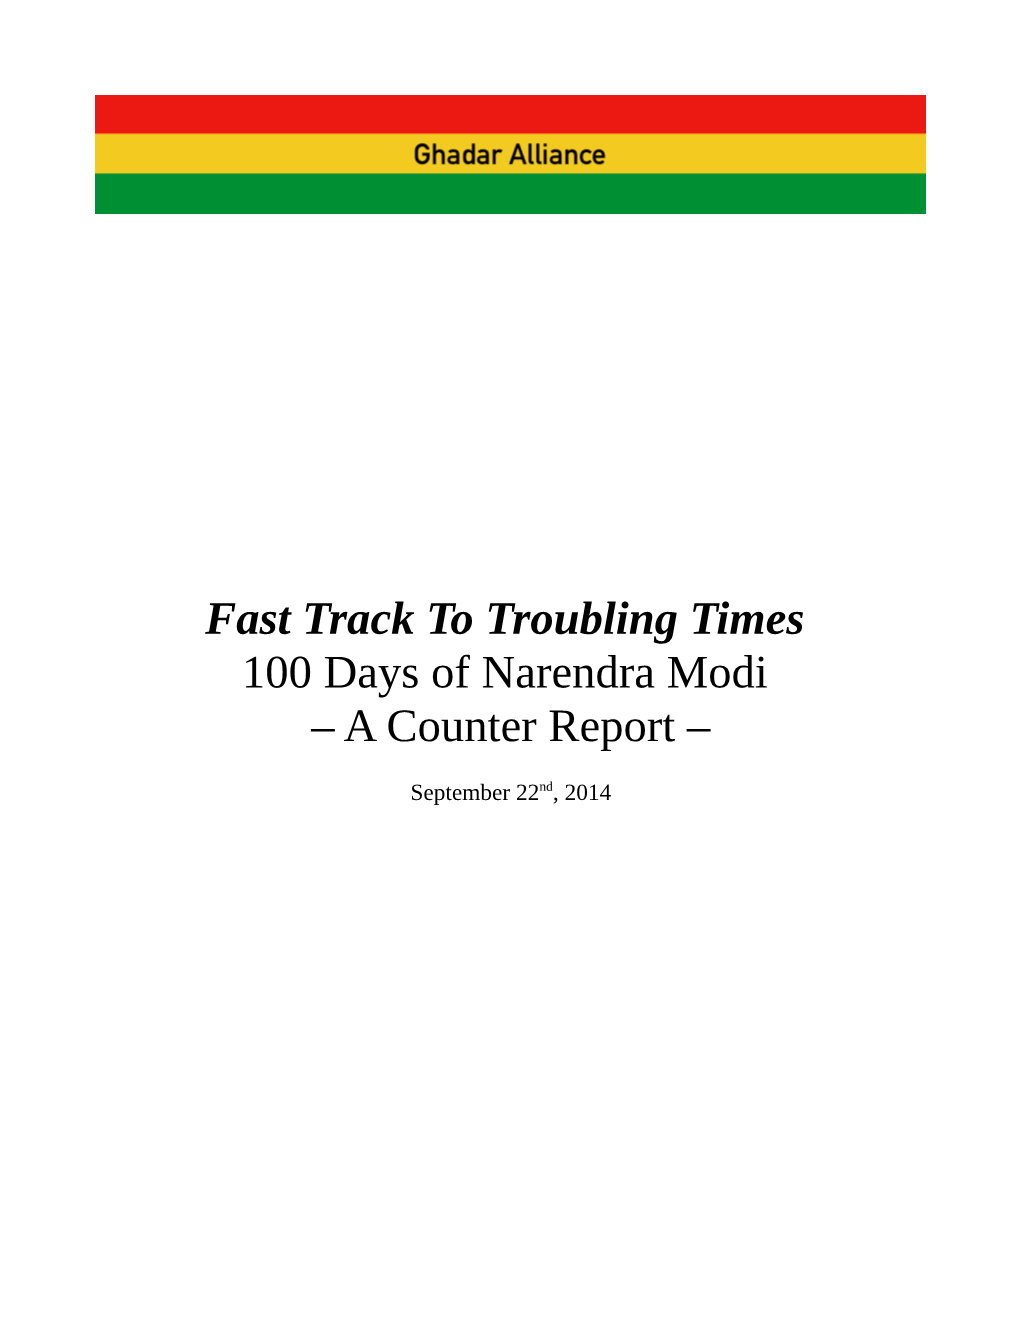 Fast Track to Troubling Times 100 Days of Narendra Modi – a Counter Report –